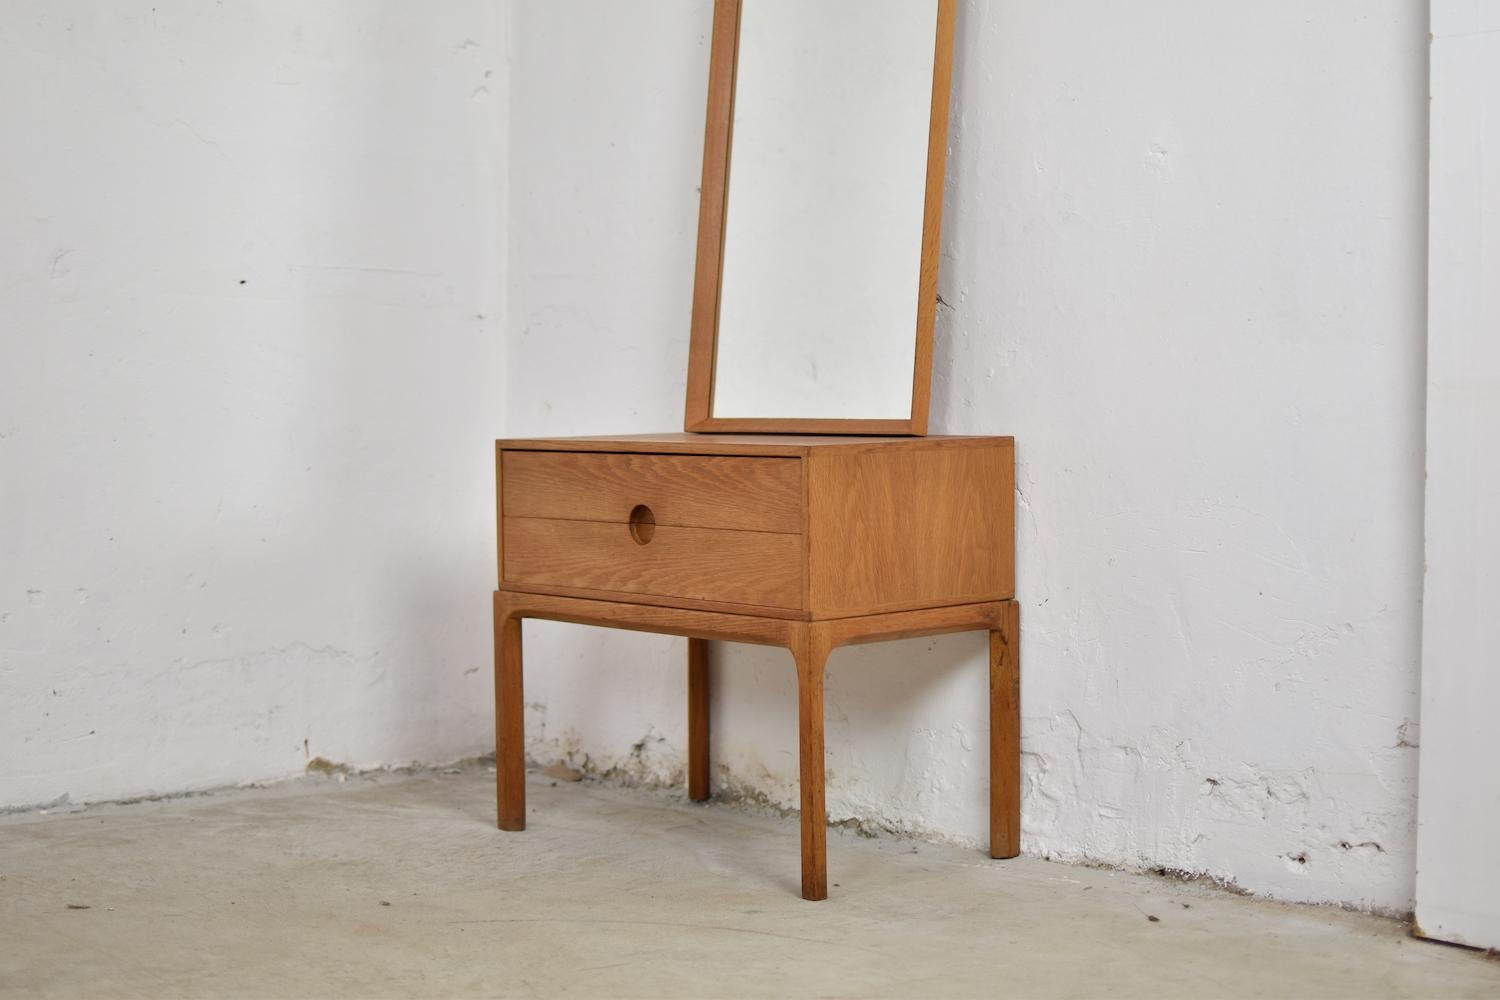 Cabinet and matching mirror by Aksel Kjersgaard for Odder Møbler, Denmark, 1960s. This entrance hall set is made out of oak. The cabinet, Model No. 384, has two marvelous shaped drawers and chamfered legs (one leg professionally restored). The